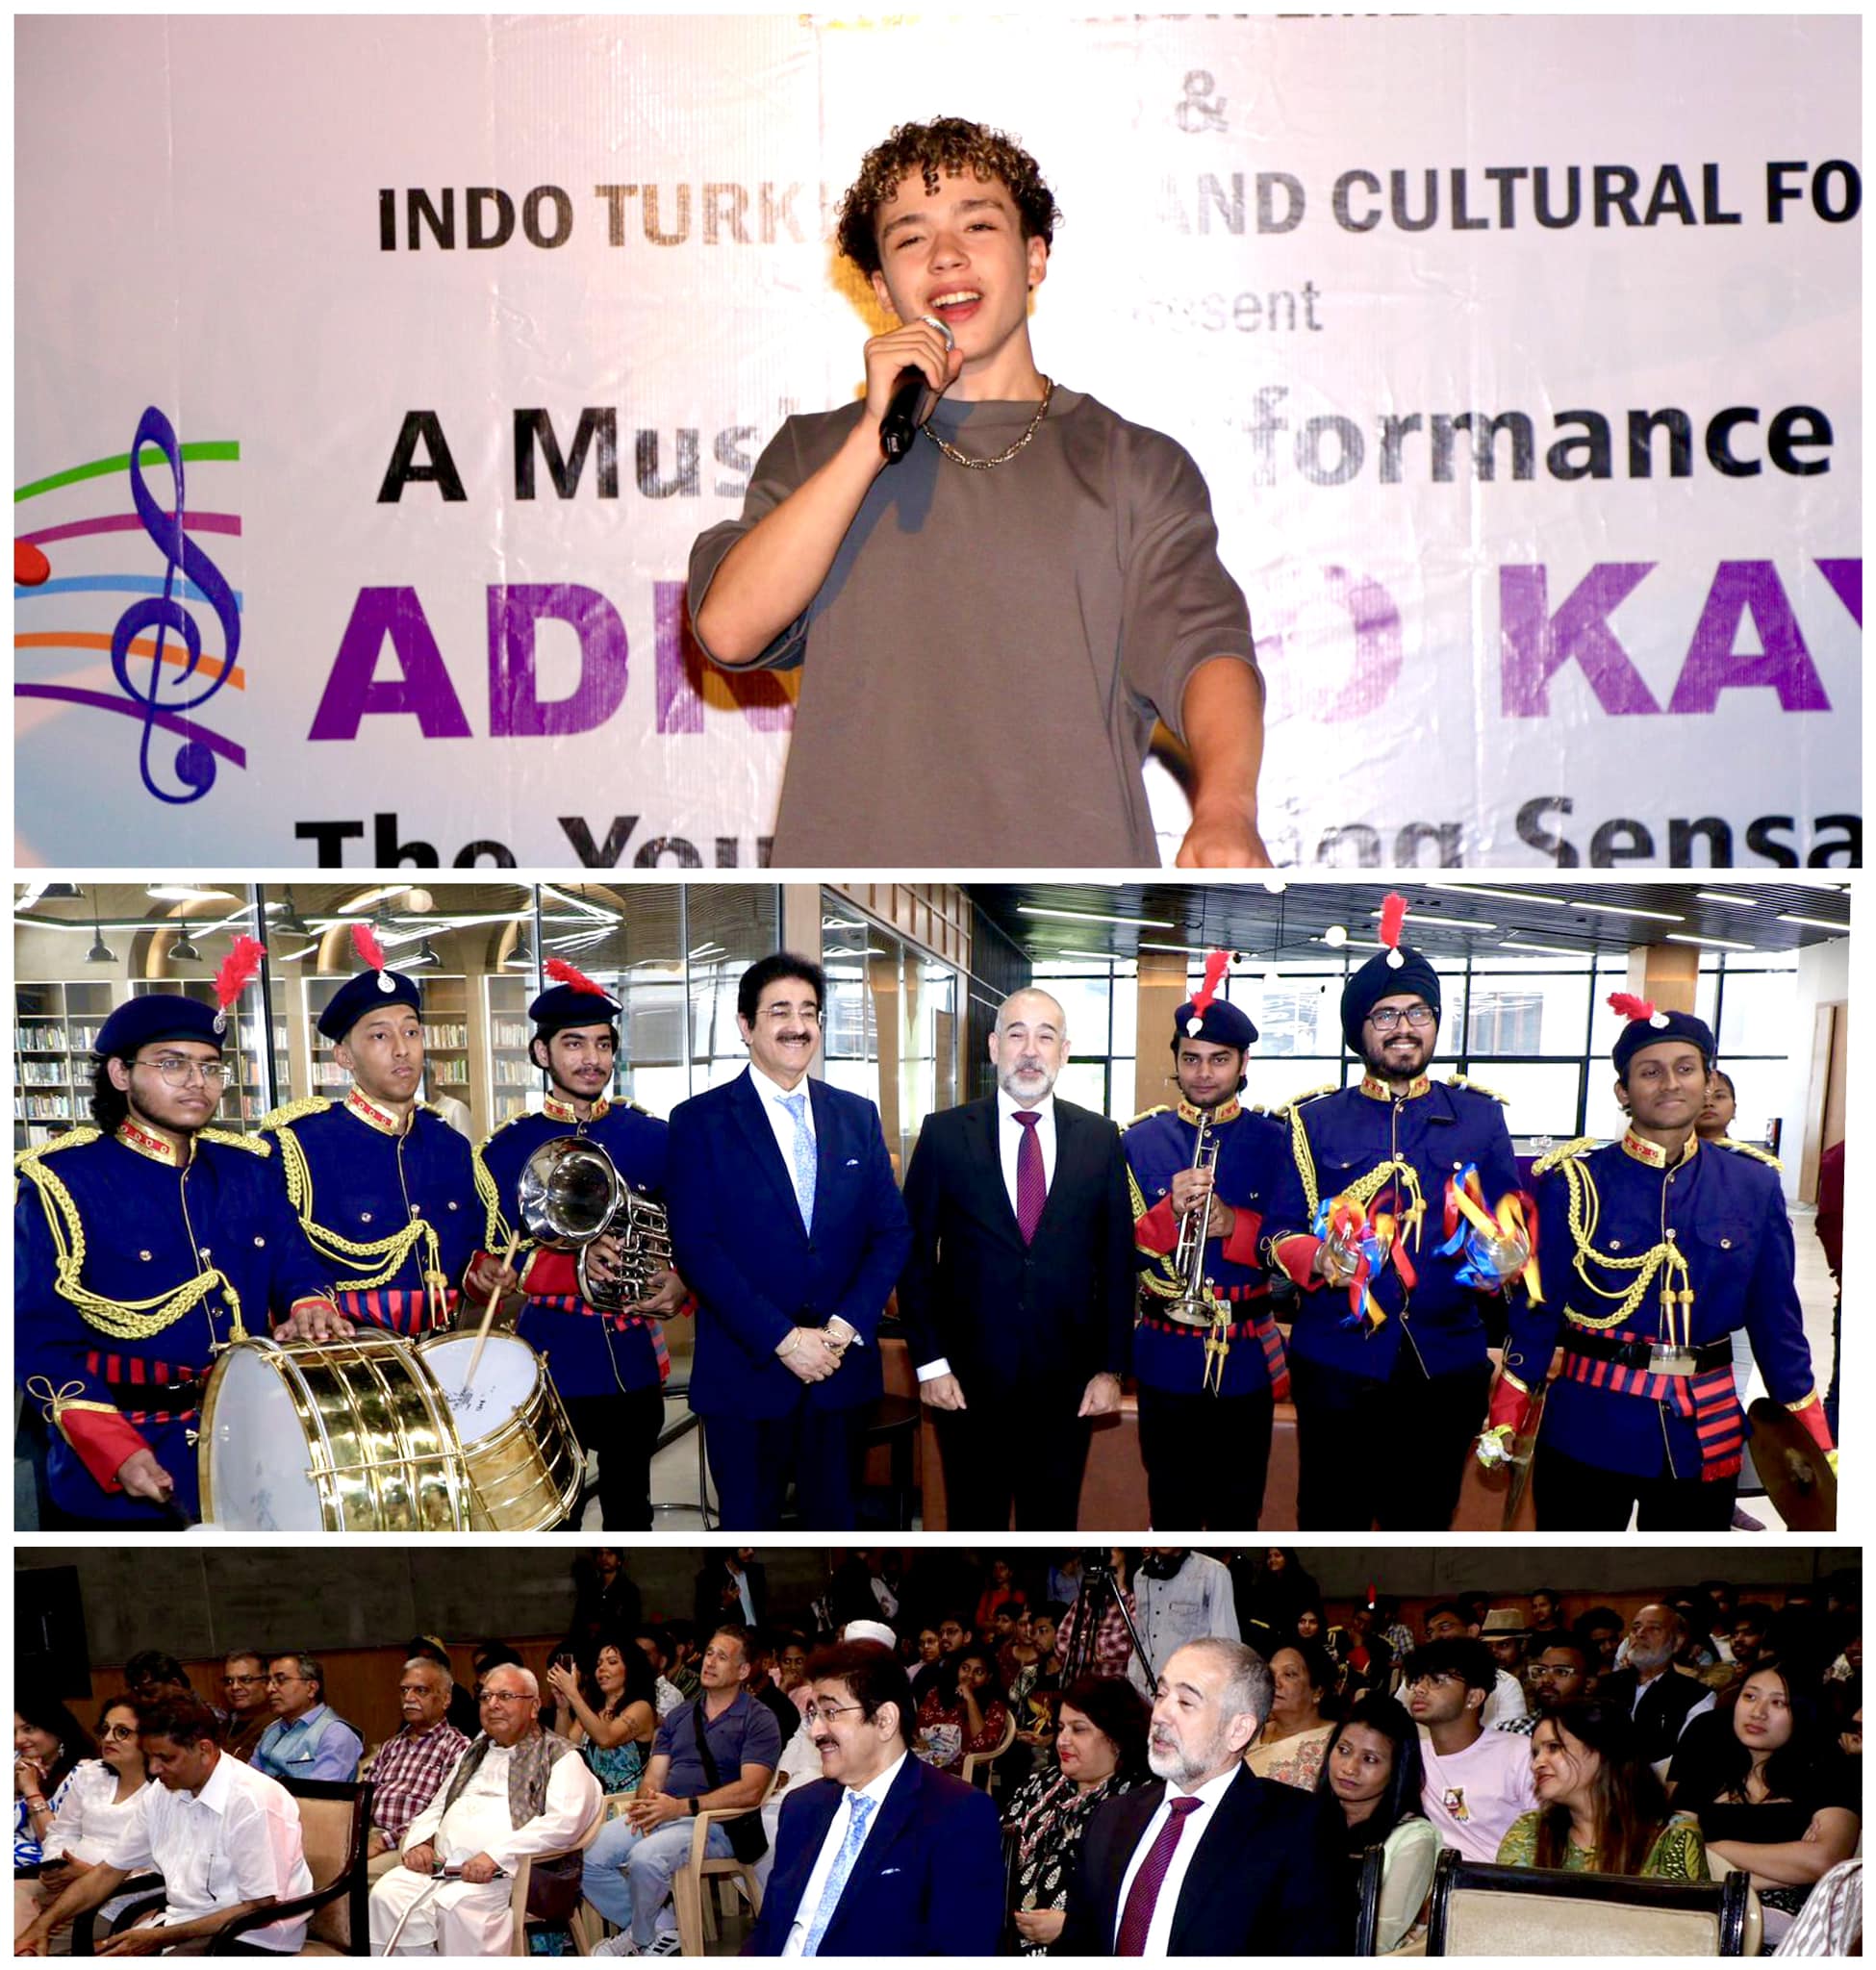 “ICMEI-A Musical Extravaganza” Unites Cultures through Music: Adriano Kaya Mesmerizes Indian Audience